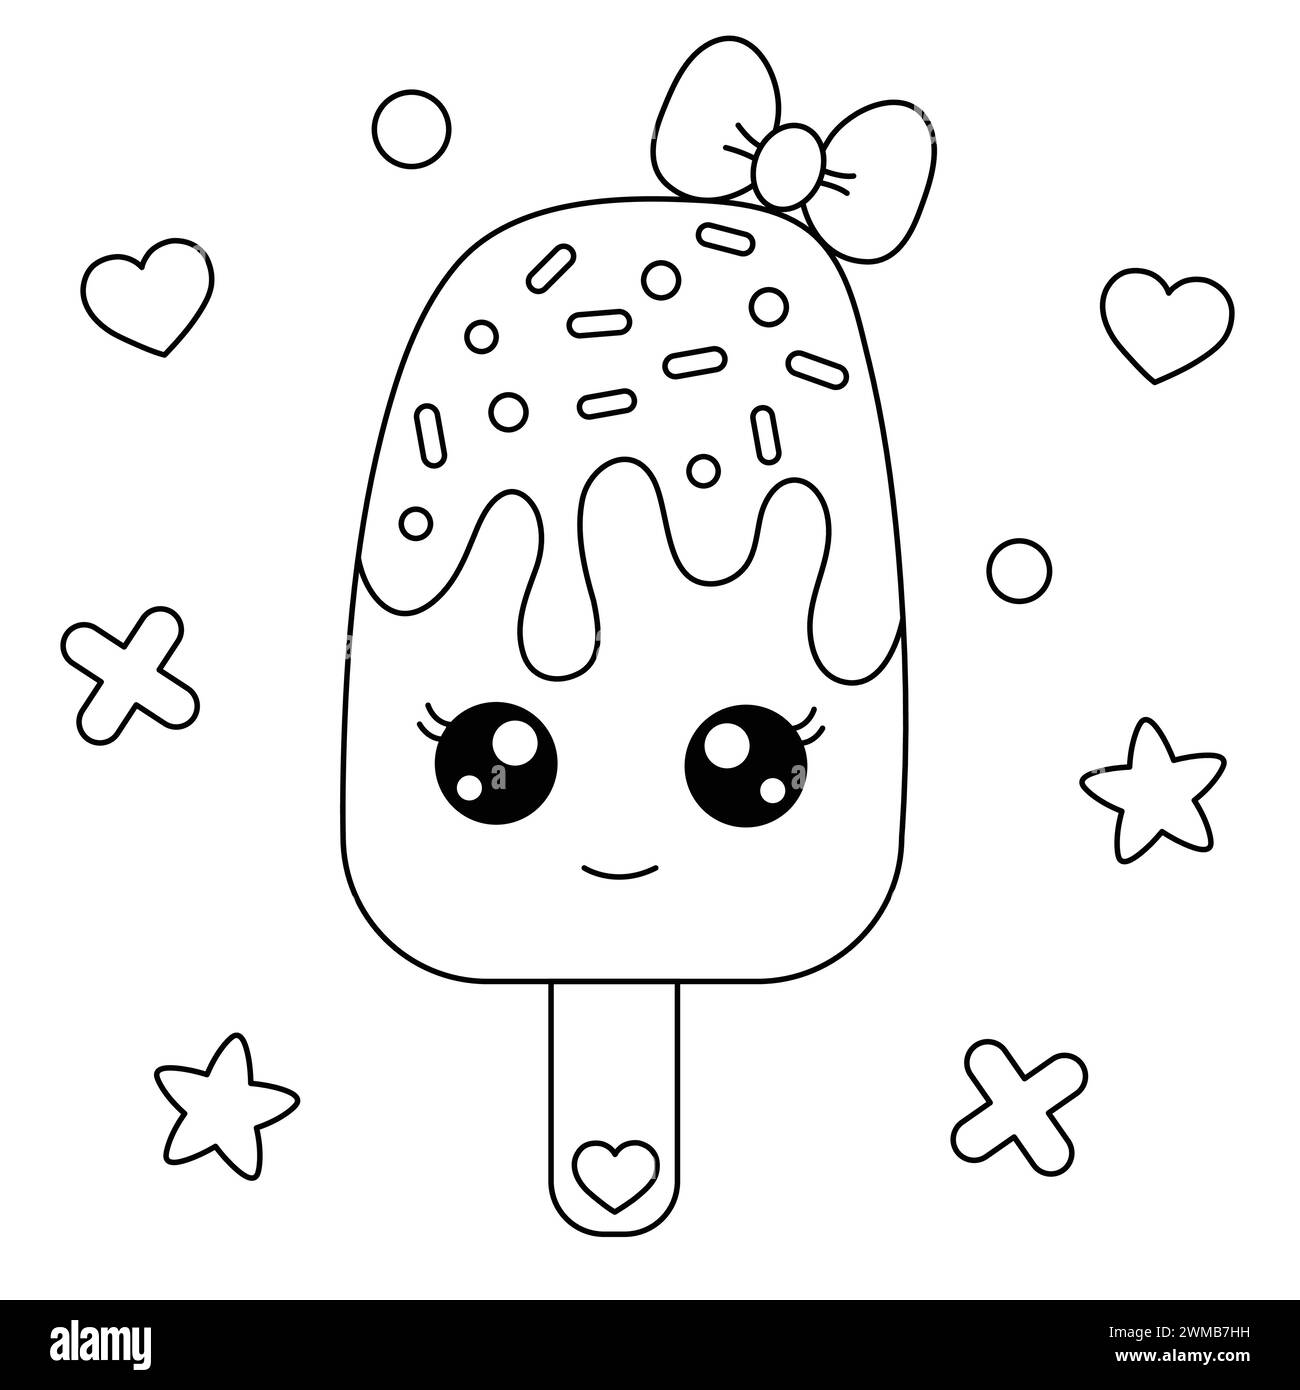 Sweet Ice Cream Coloring Page. Kawaii Ice-Cream Vector Illustration. Cartoon Popsicle. Black And White Outline Illustration Isolated On A White Backgr Stock Vector